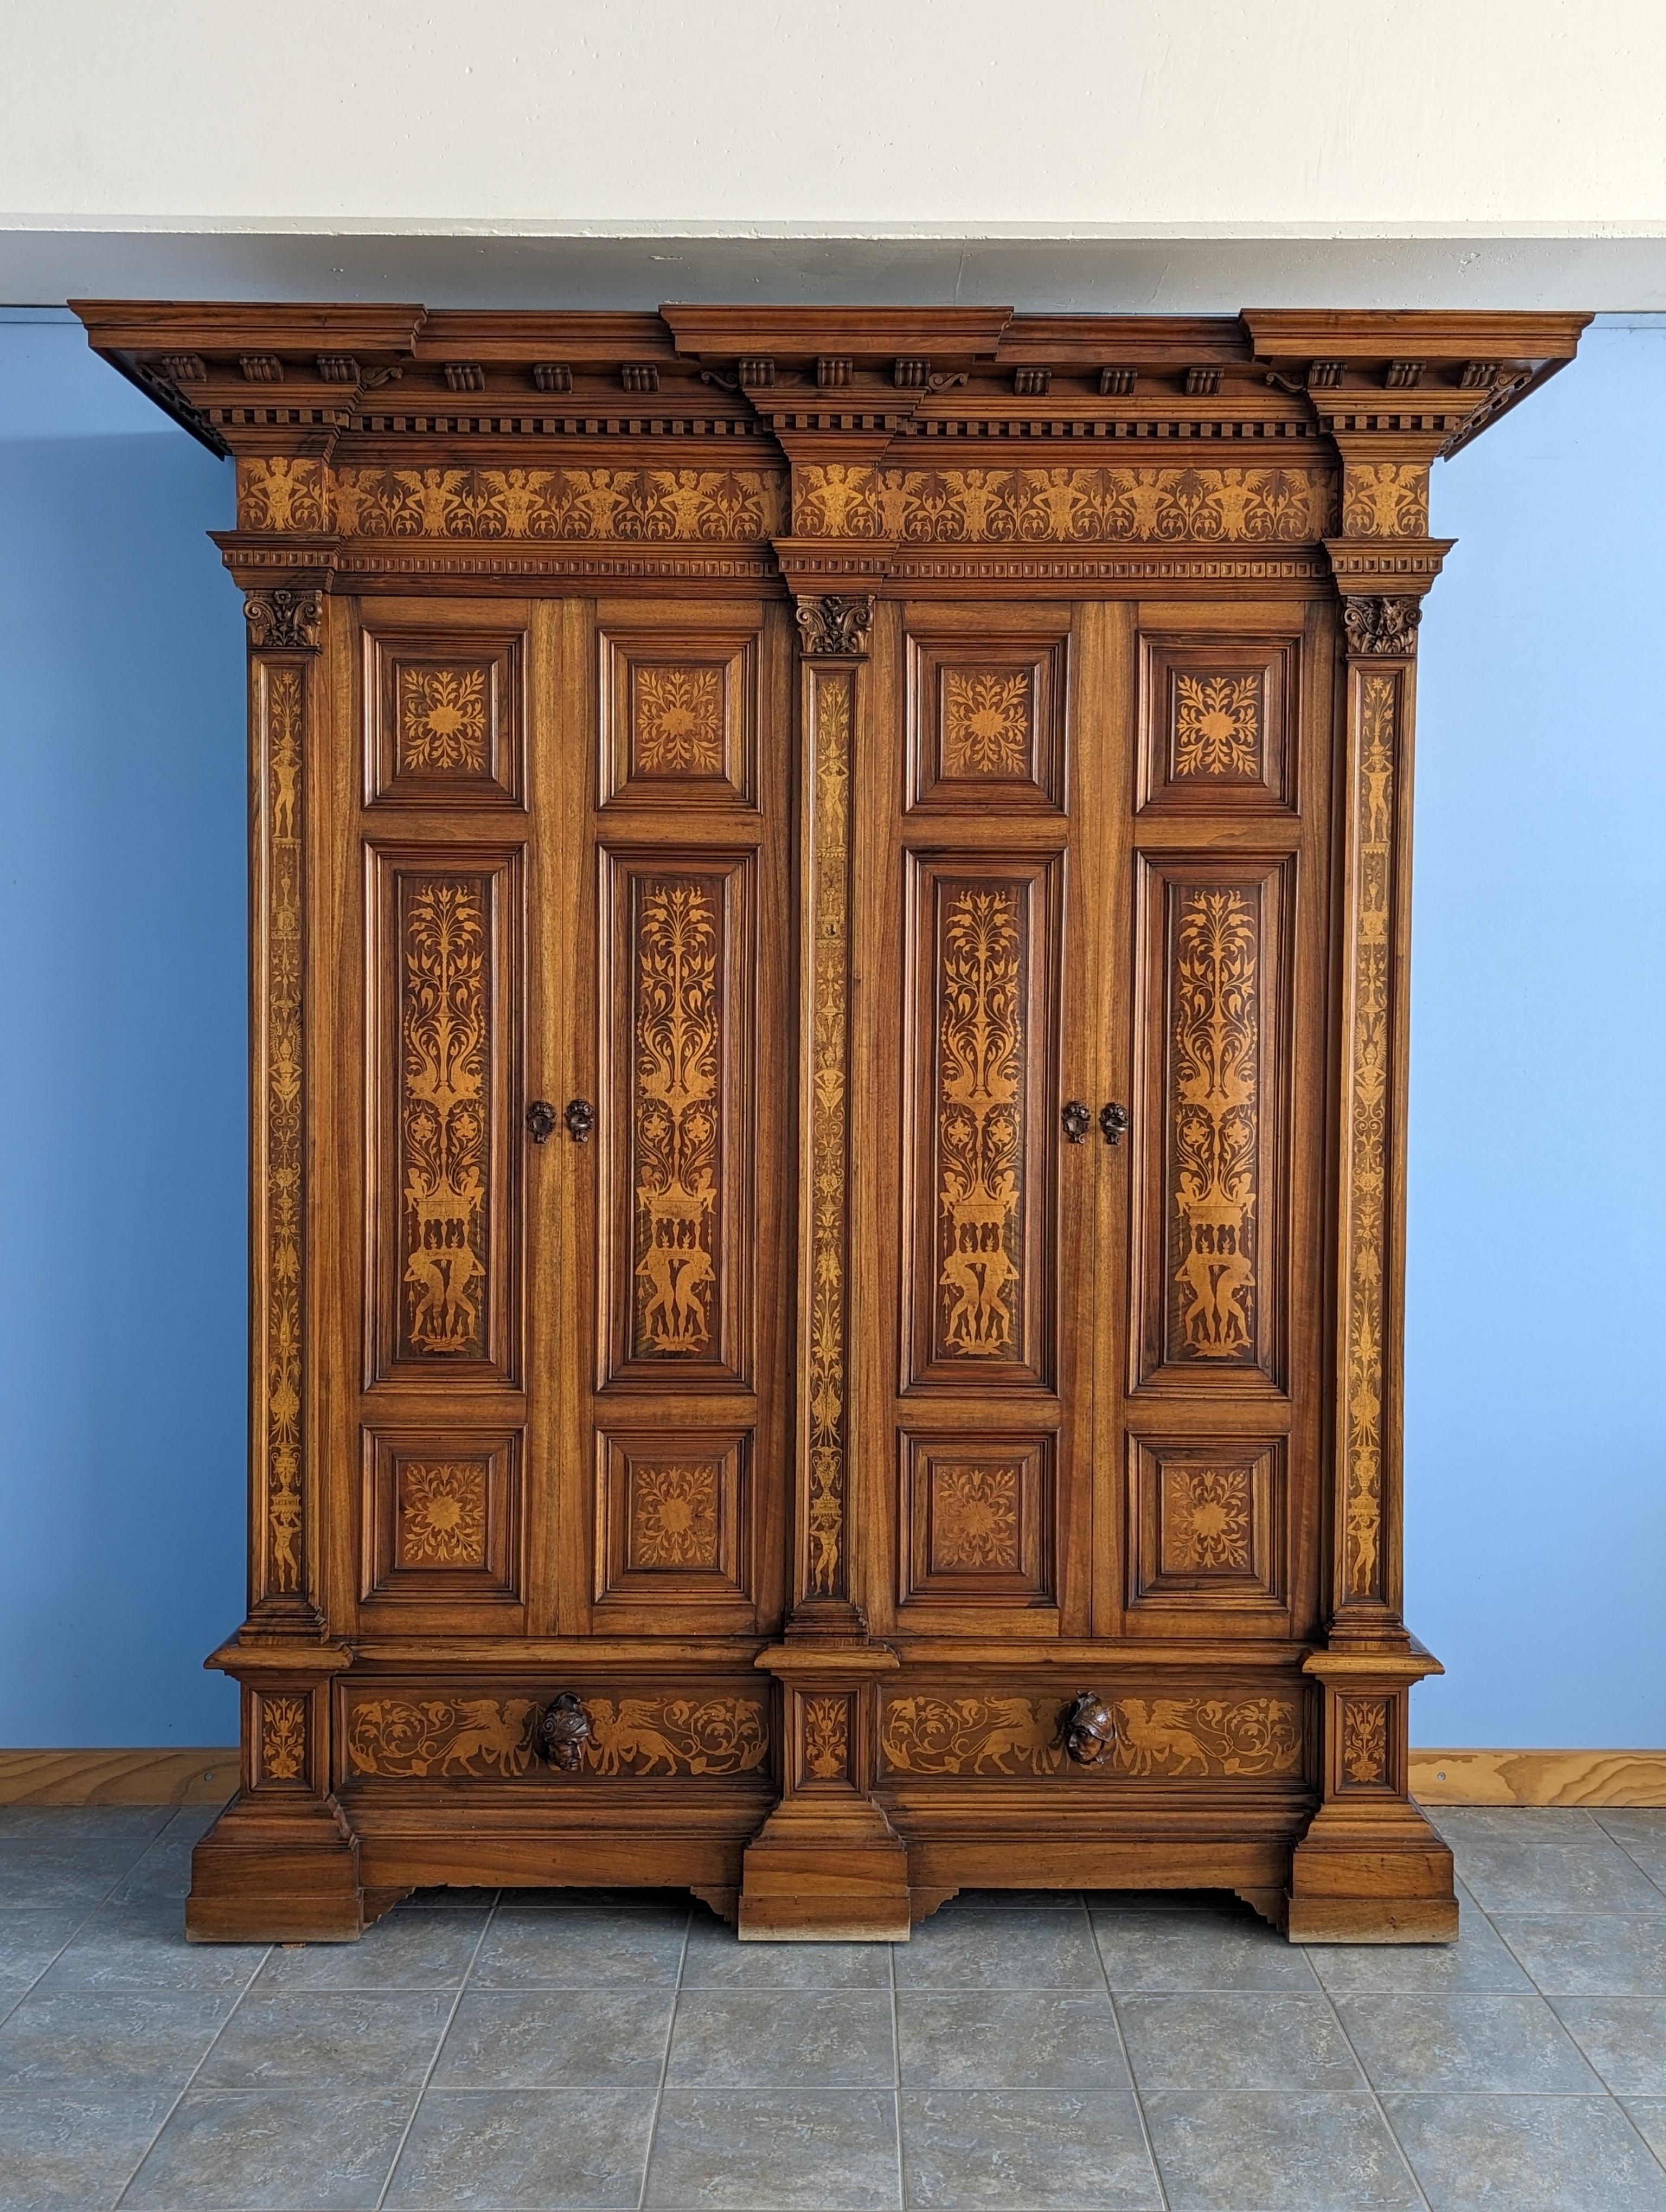 Austrian Antique Neo-Renaissance Walnut Armoire with Inlays and Four Doors, Late 19th C.